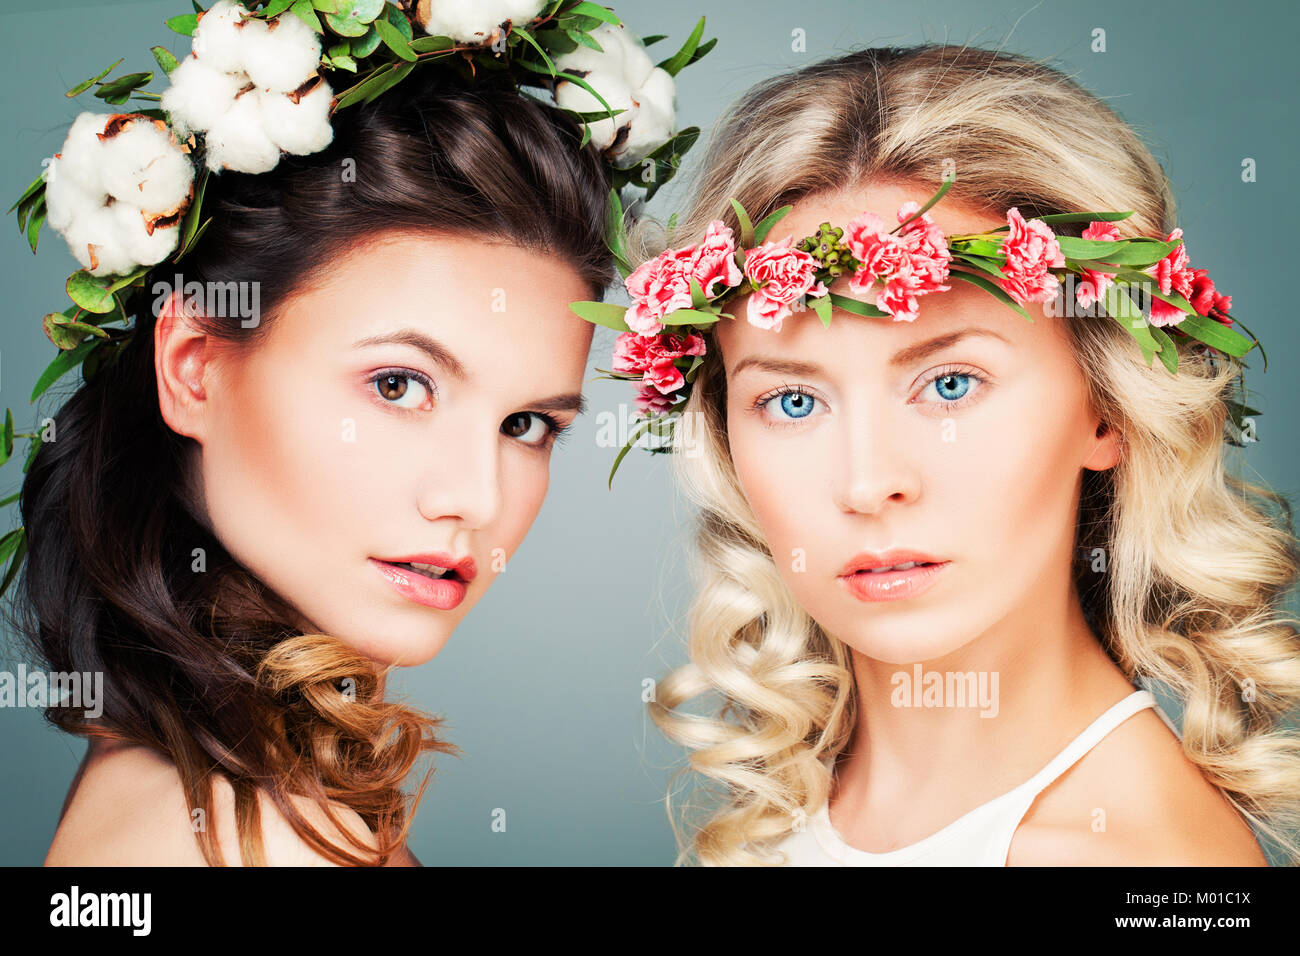 Beautiful Women with Permed Hairstyle, Makeup and Flowers. Young Beauty Stock Photo